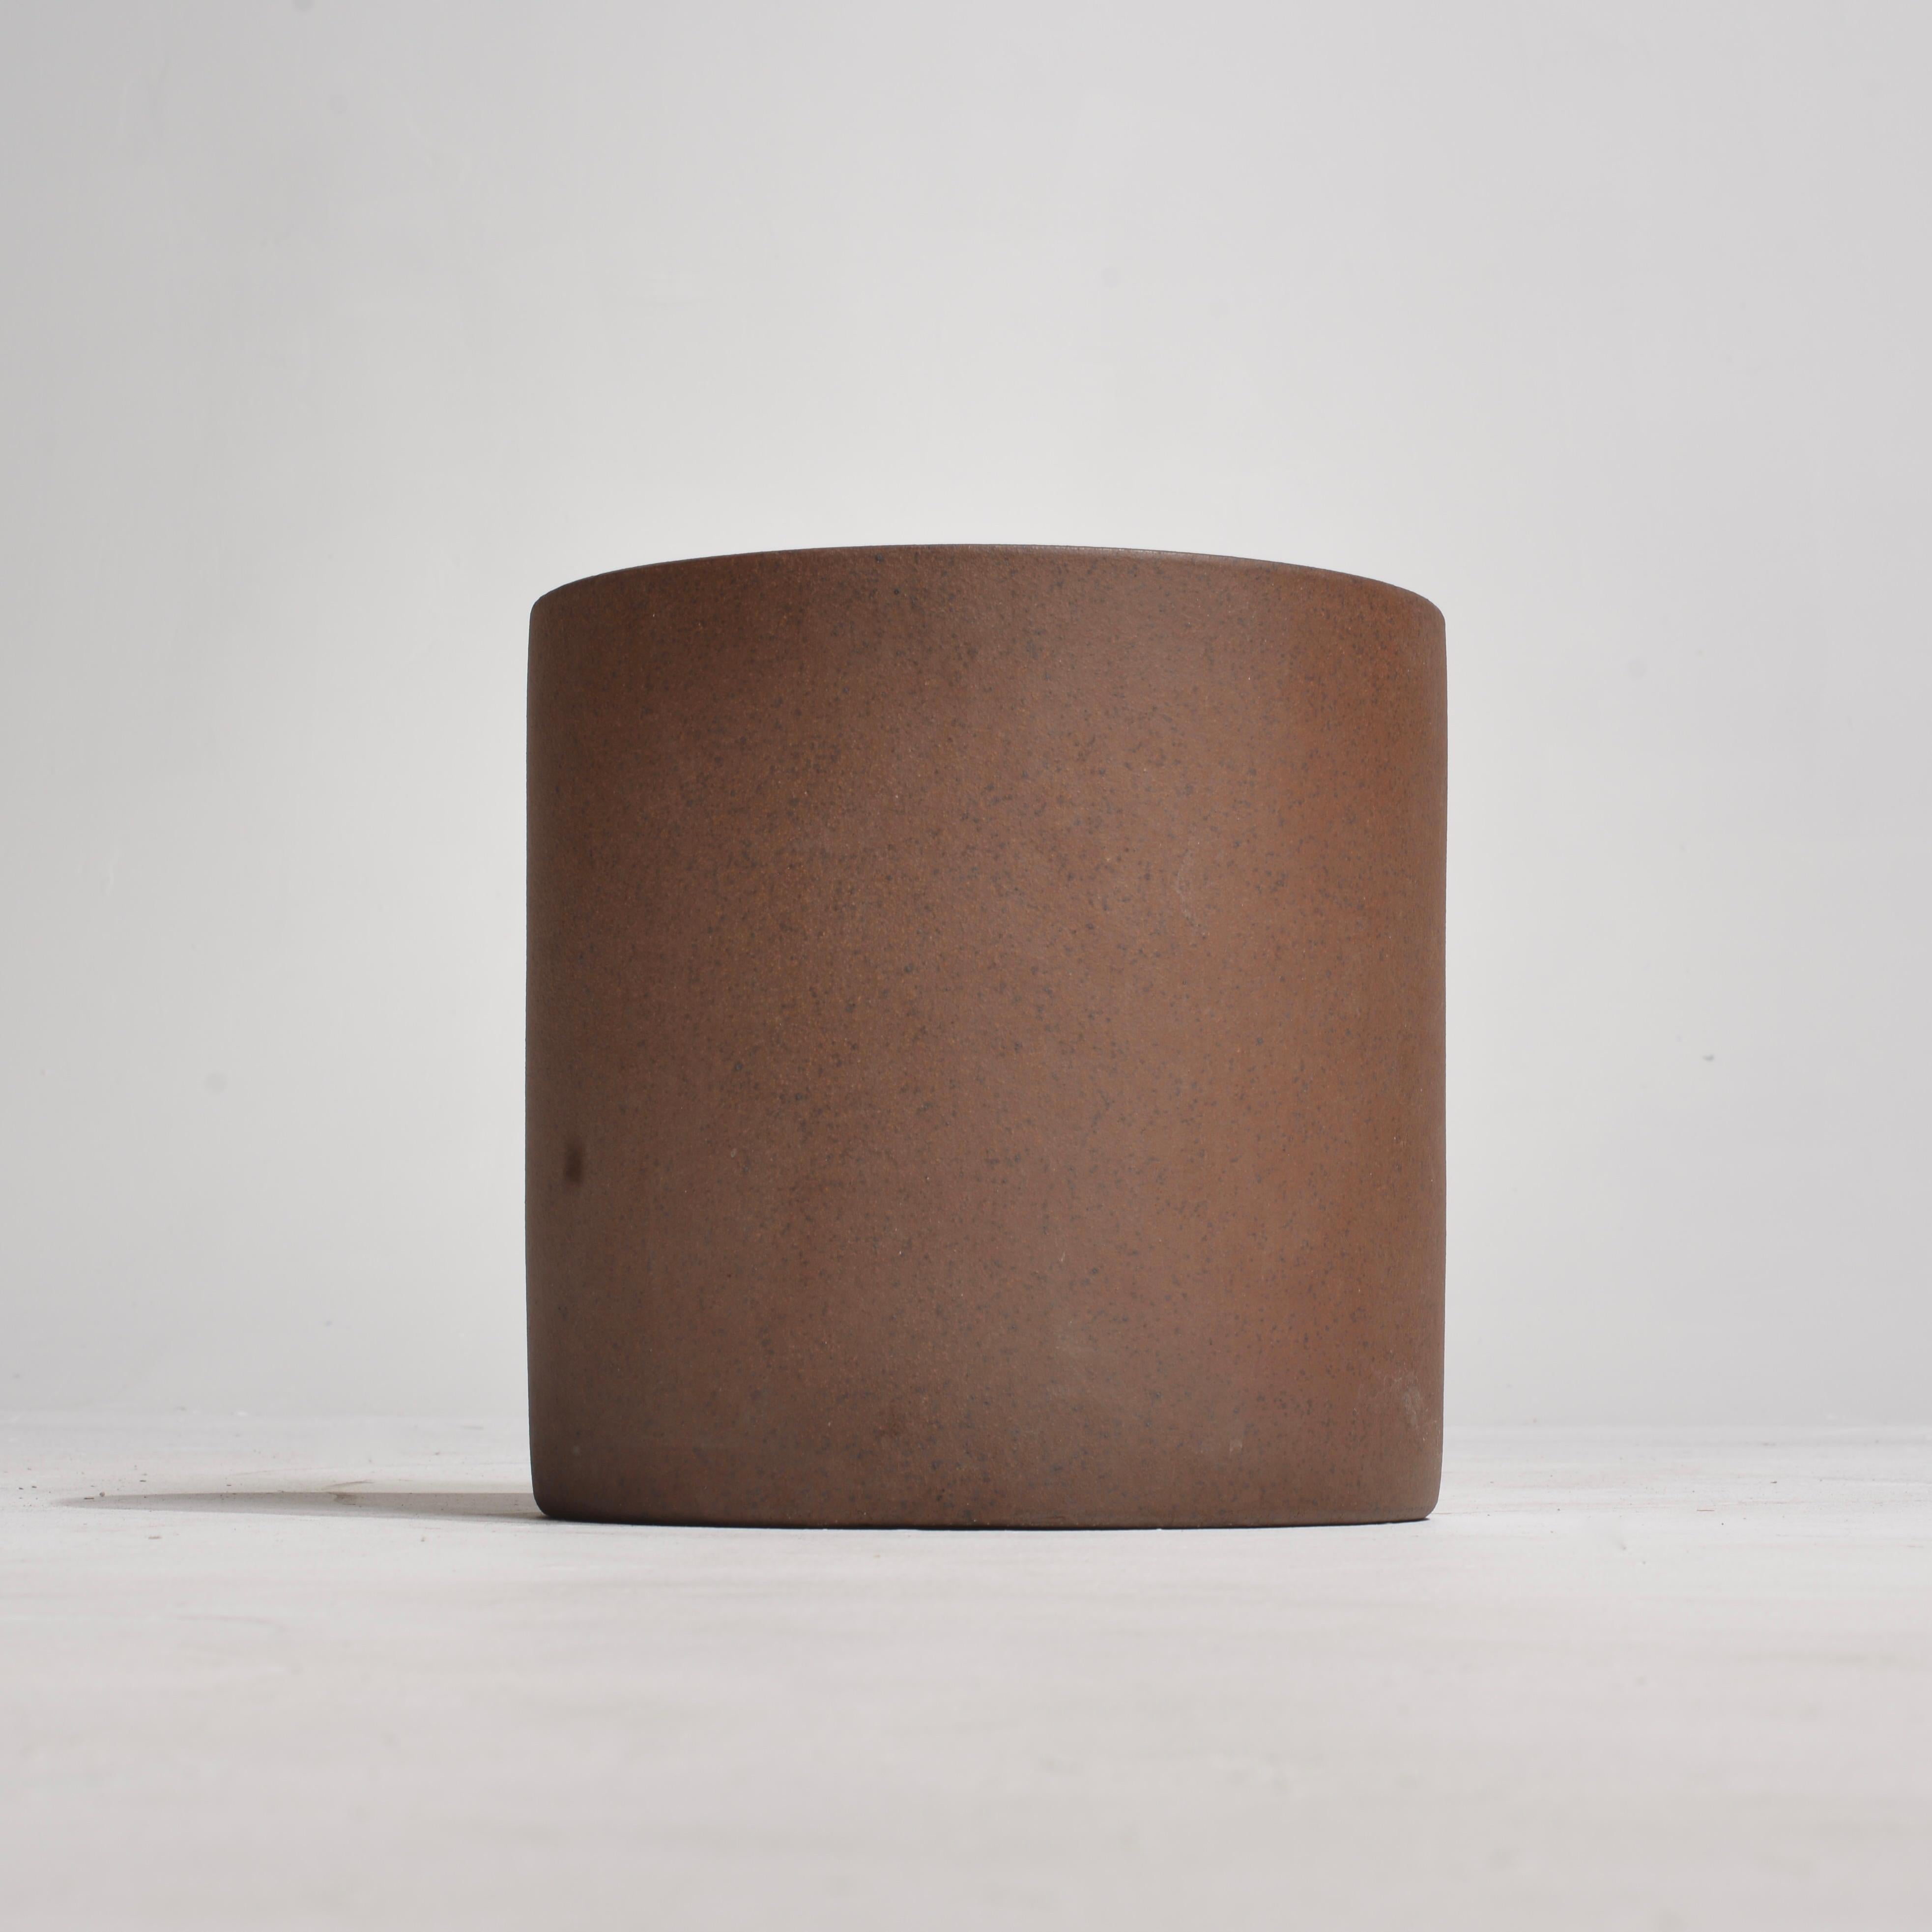 David Cressey Cylindrical Stoneware Planter for Architectural Pottery In Good Condition For Sale In Los Angeles, CA